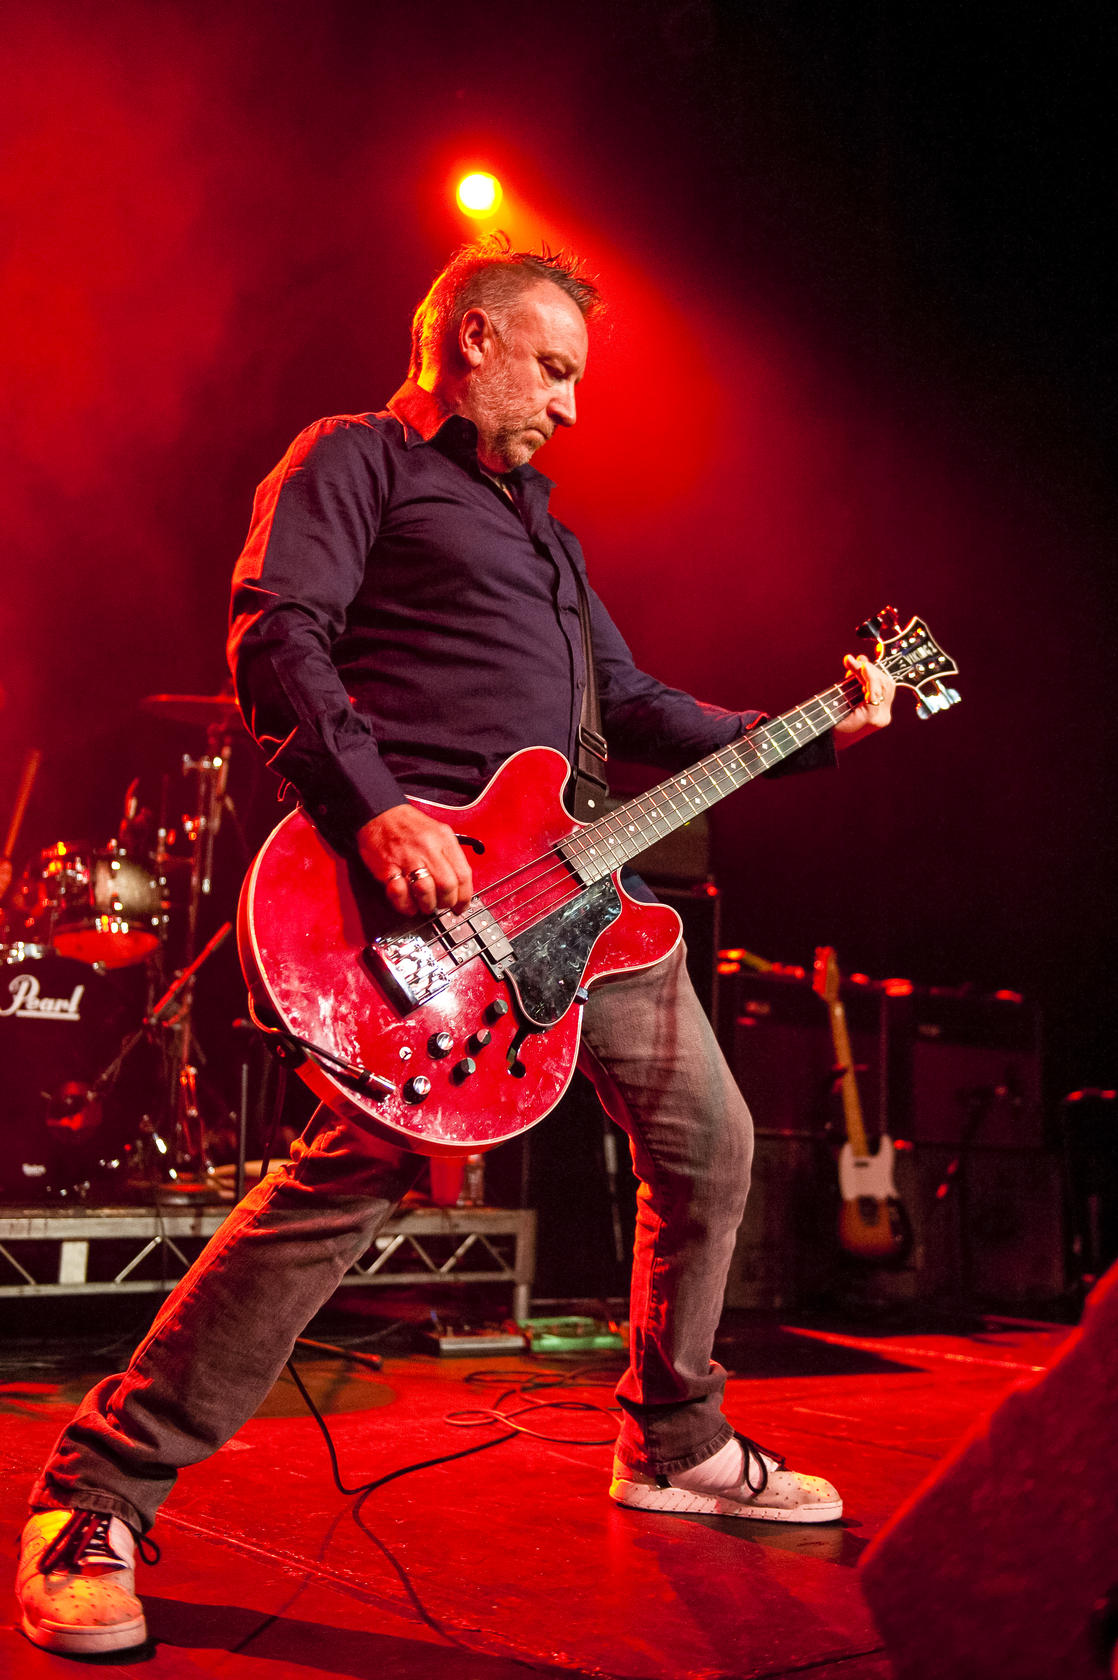 Peter Hook performs with The Light. Photo: Timothy Norris